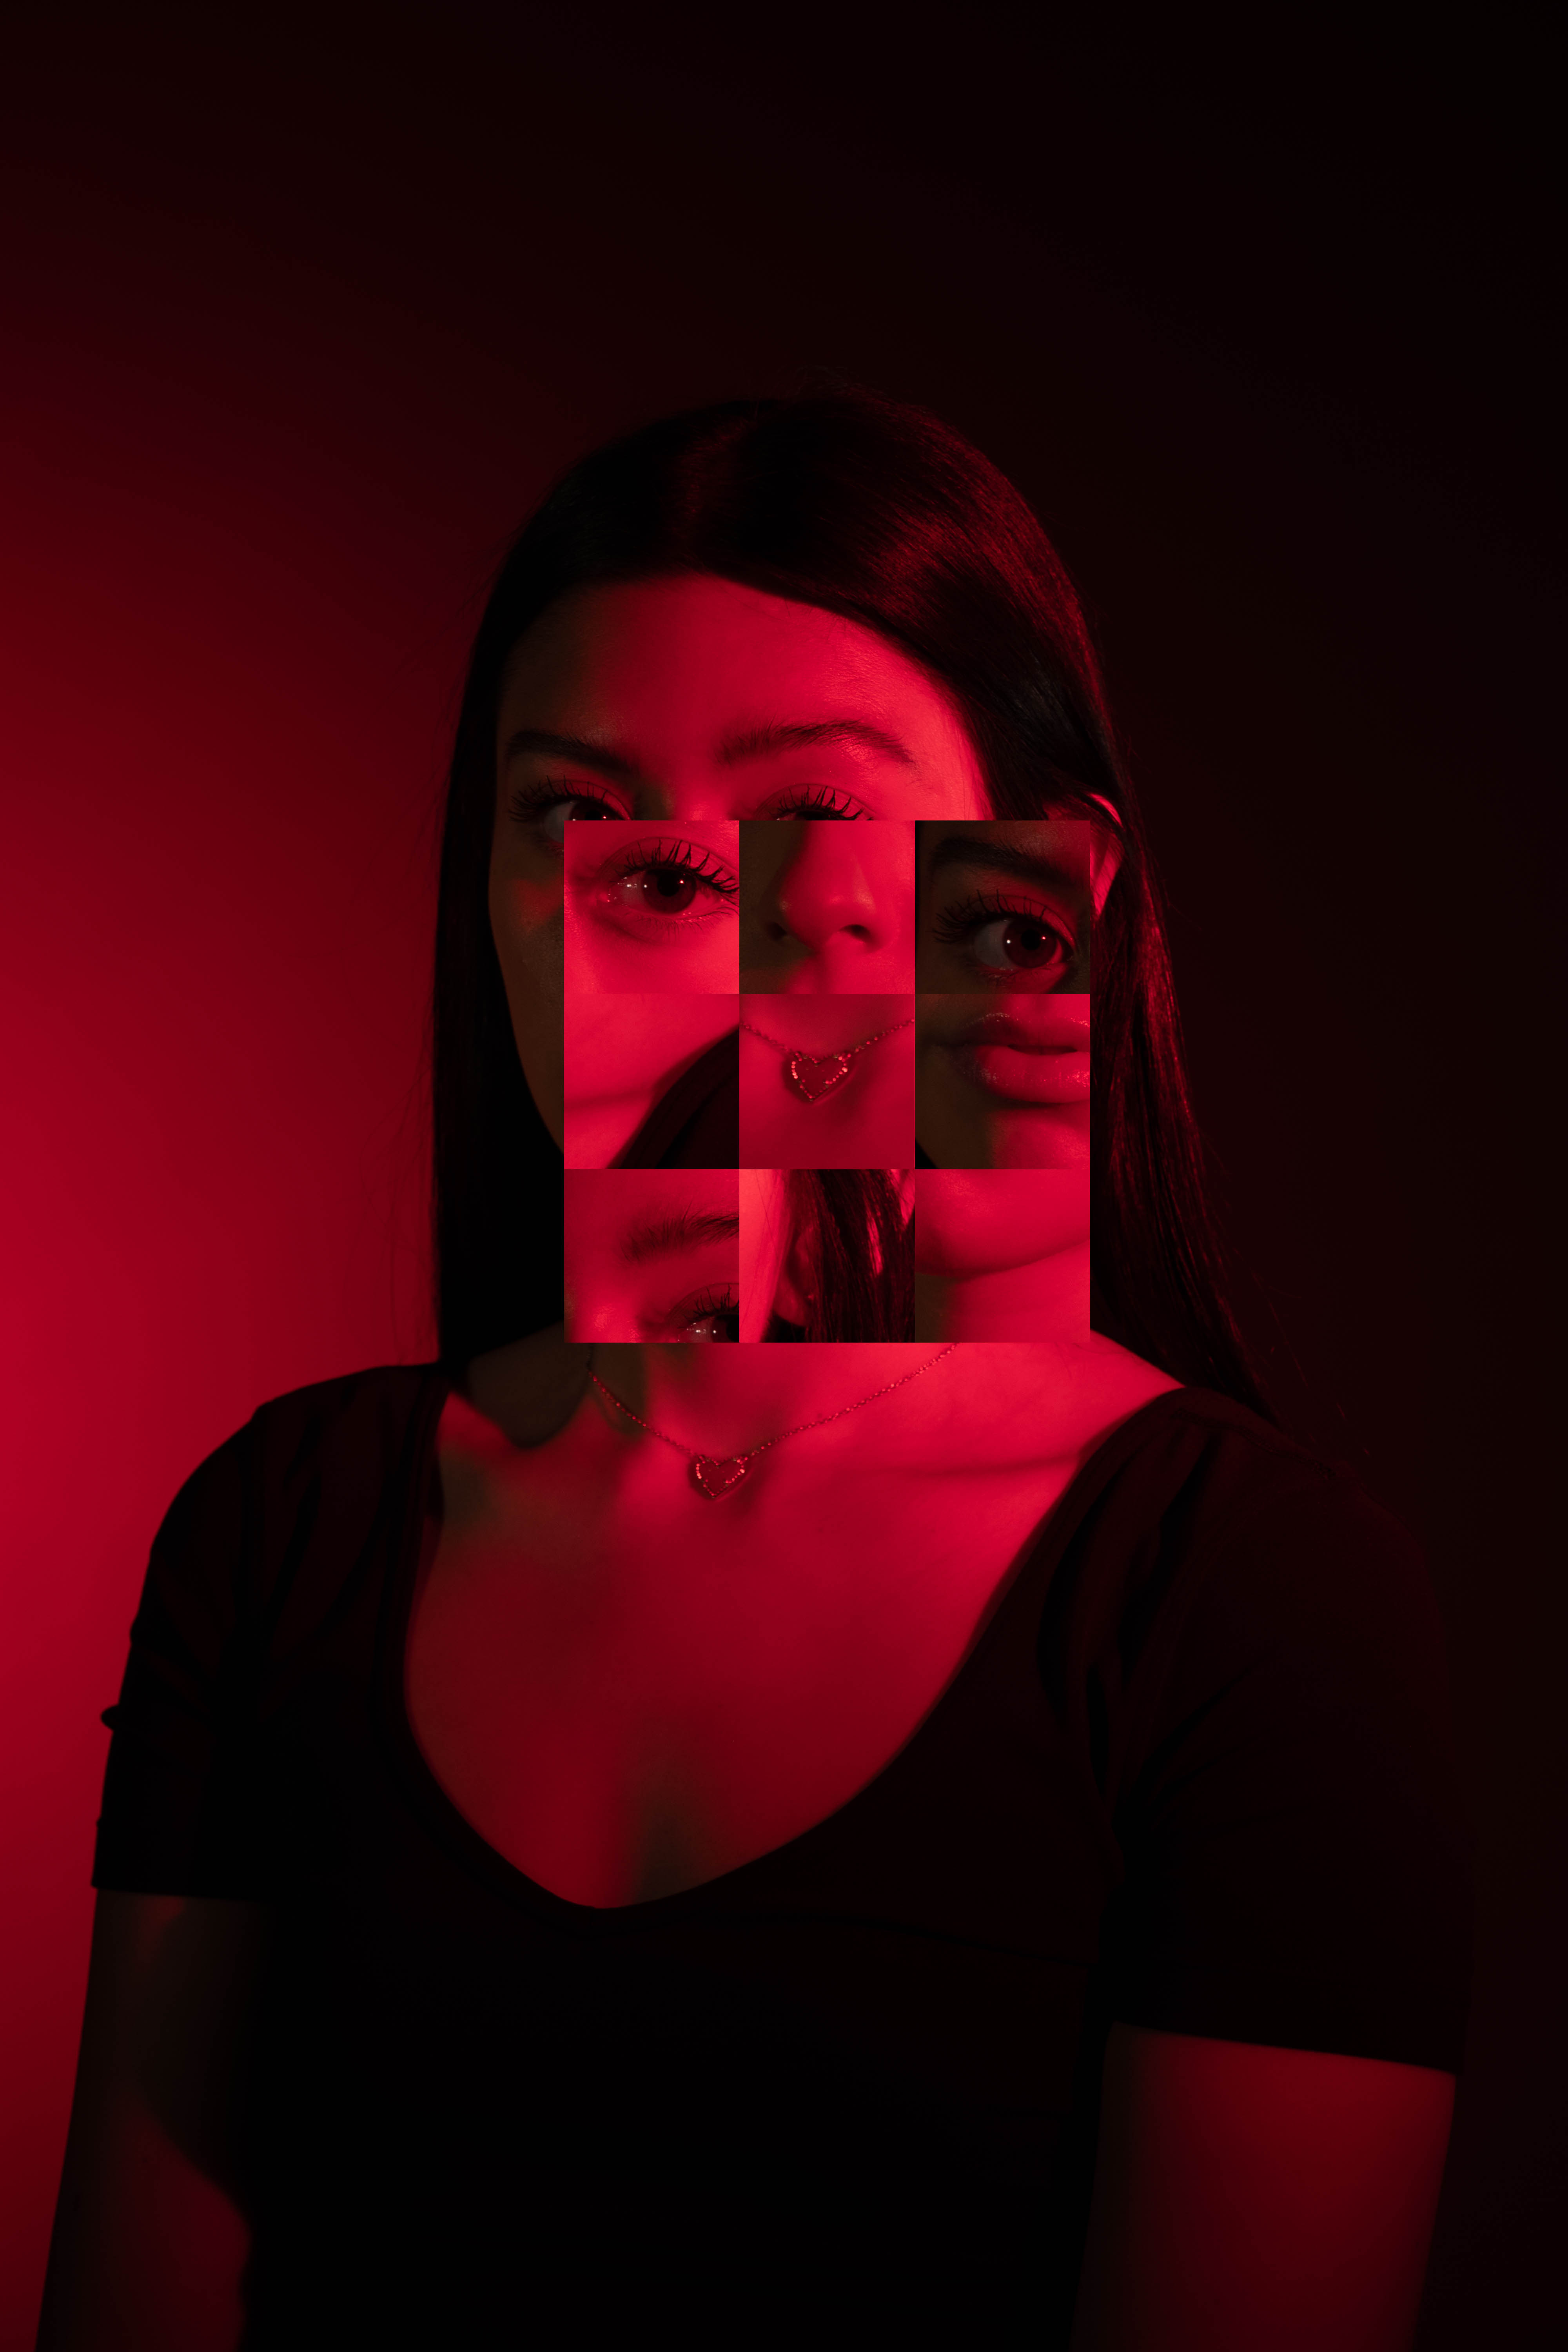 studio photograph of a girl with dark hair, wearing a black shirt, with red light highlighting her face and the background; face is replaced with a grid of nine squares